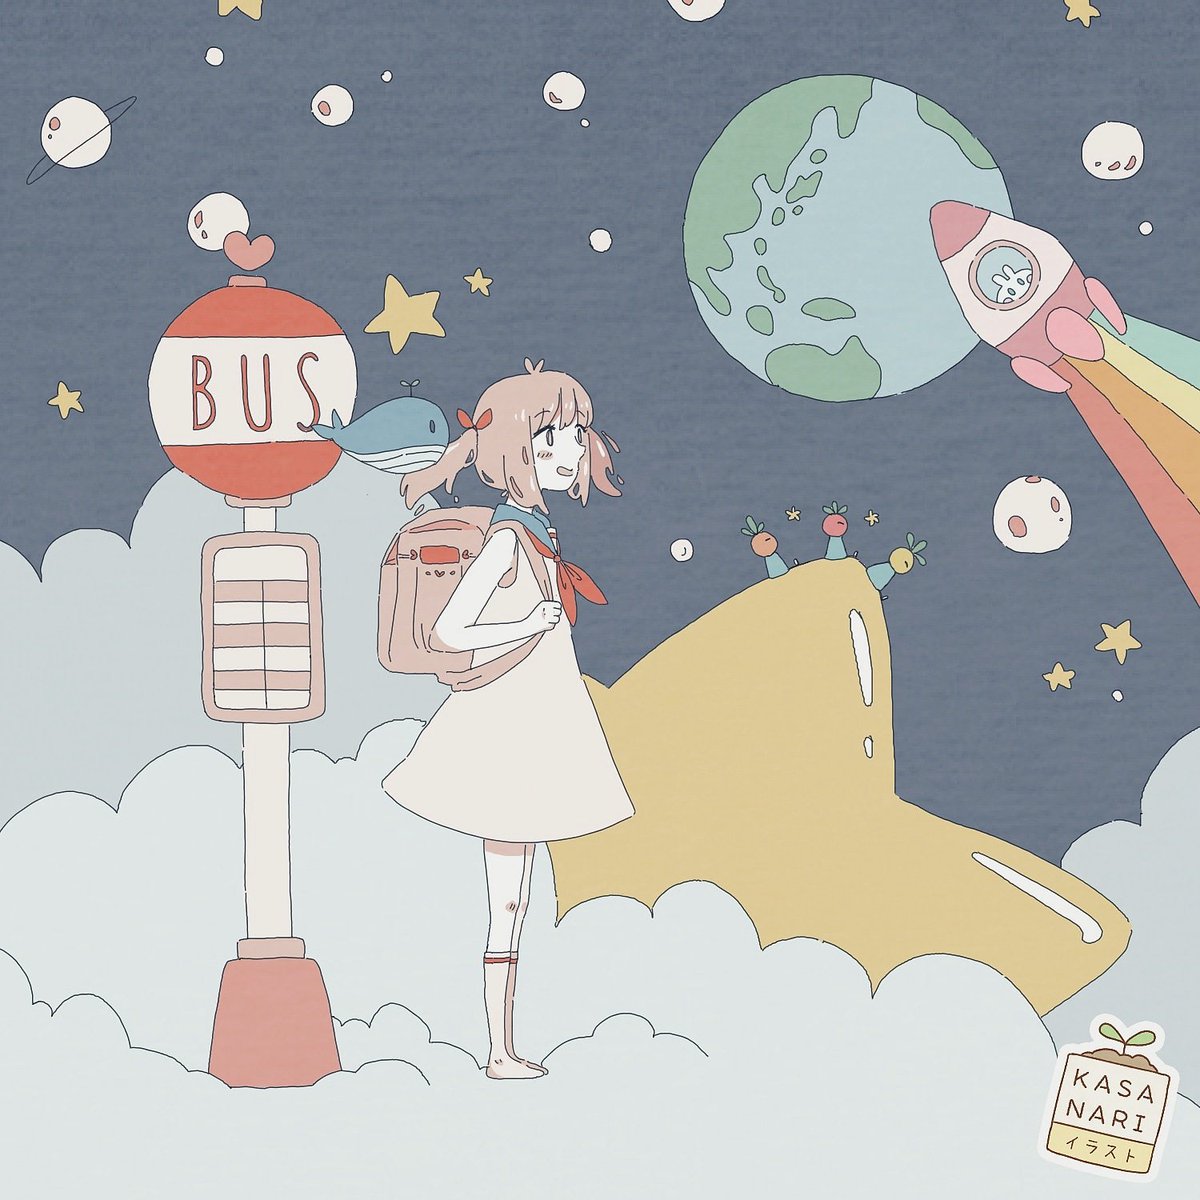 Nari در توییتر 18 04 29 Waiting For The Bus To Take Her To School 学校に行くバスを待っています Space Bus Waiting School Earth Cloud Whale Rocket Star Pastel Kawaii Drawing Illustration 宇宙 バス停 待ってます 学校 地球